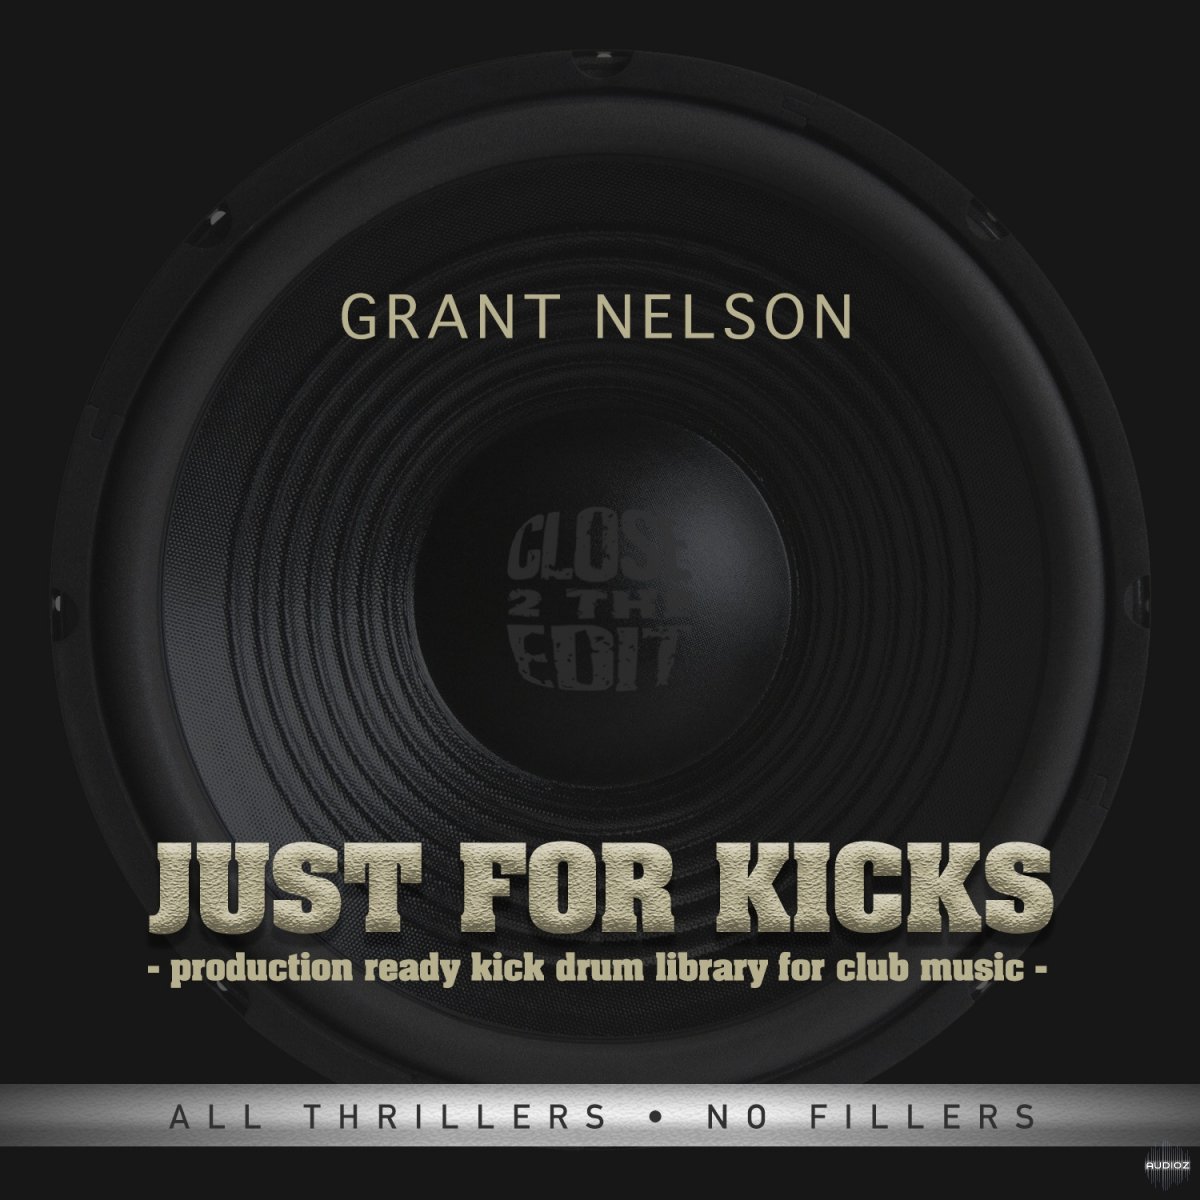 Download Grant Nelson All Thrillers No Fillers Just For Kicks WAV Tech ...